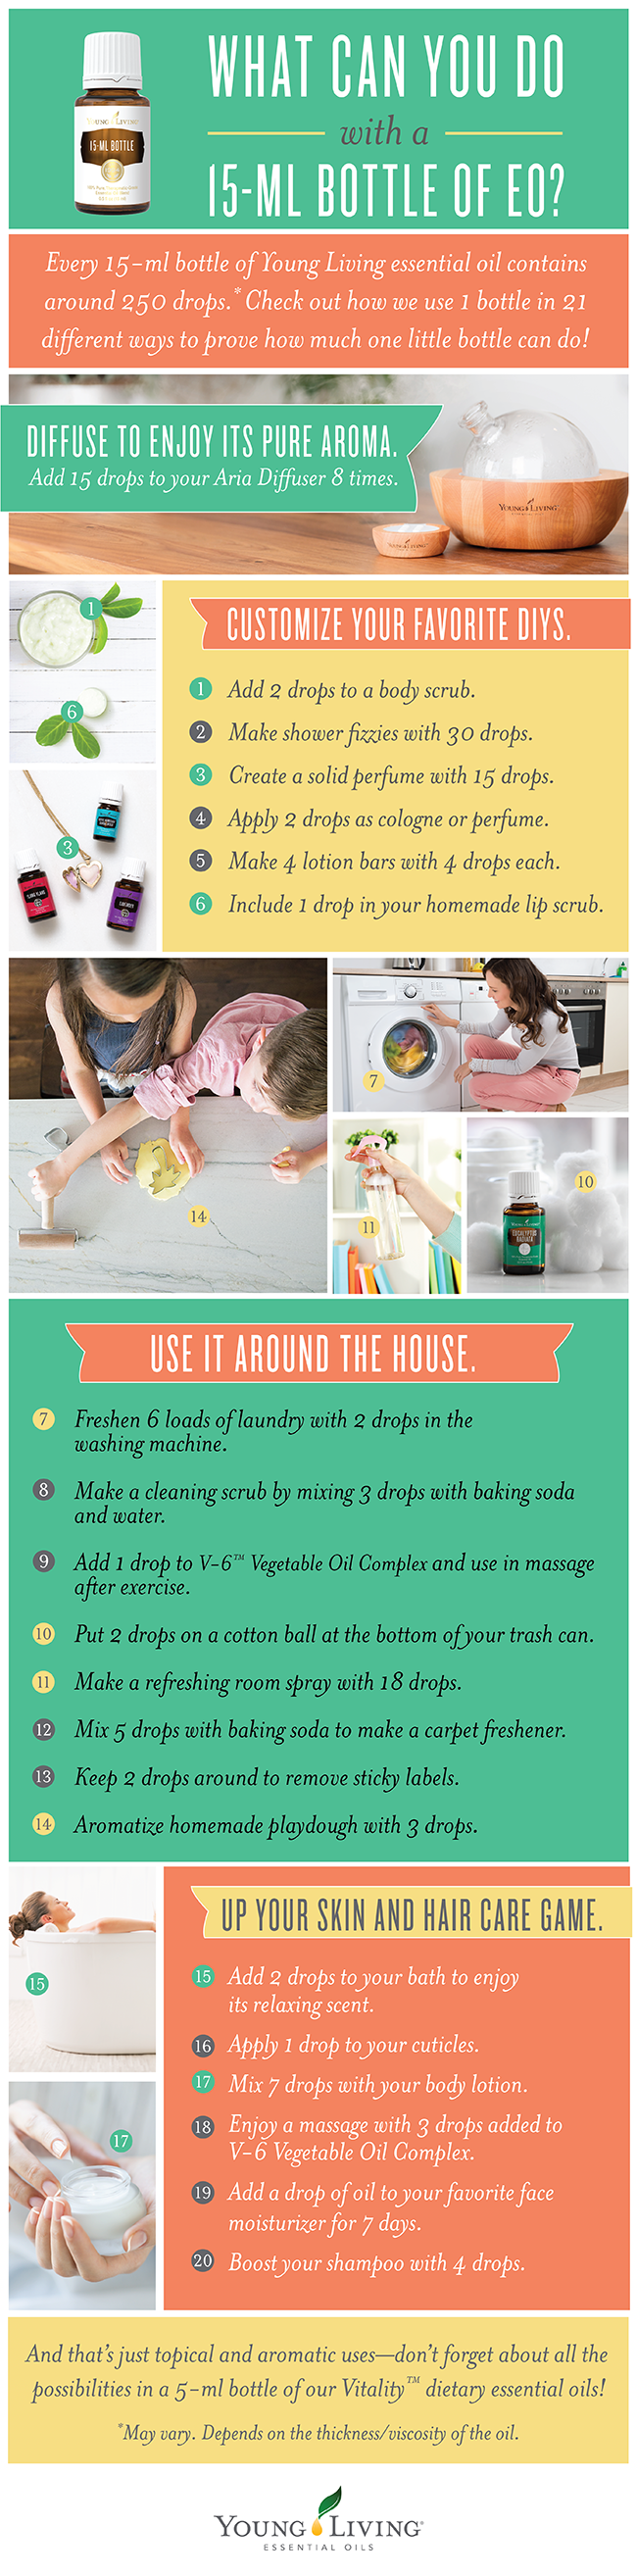 Young Living - Uses for a 15-ml Bottle of Essential Oil